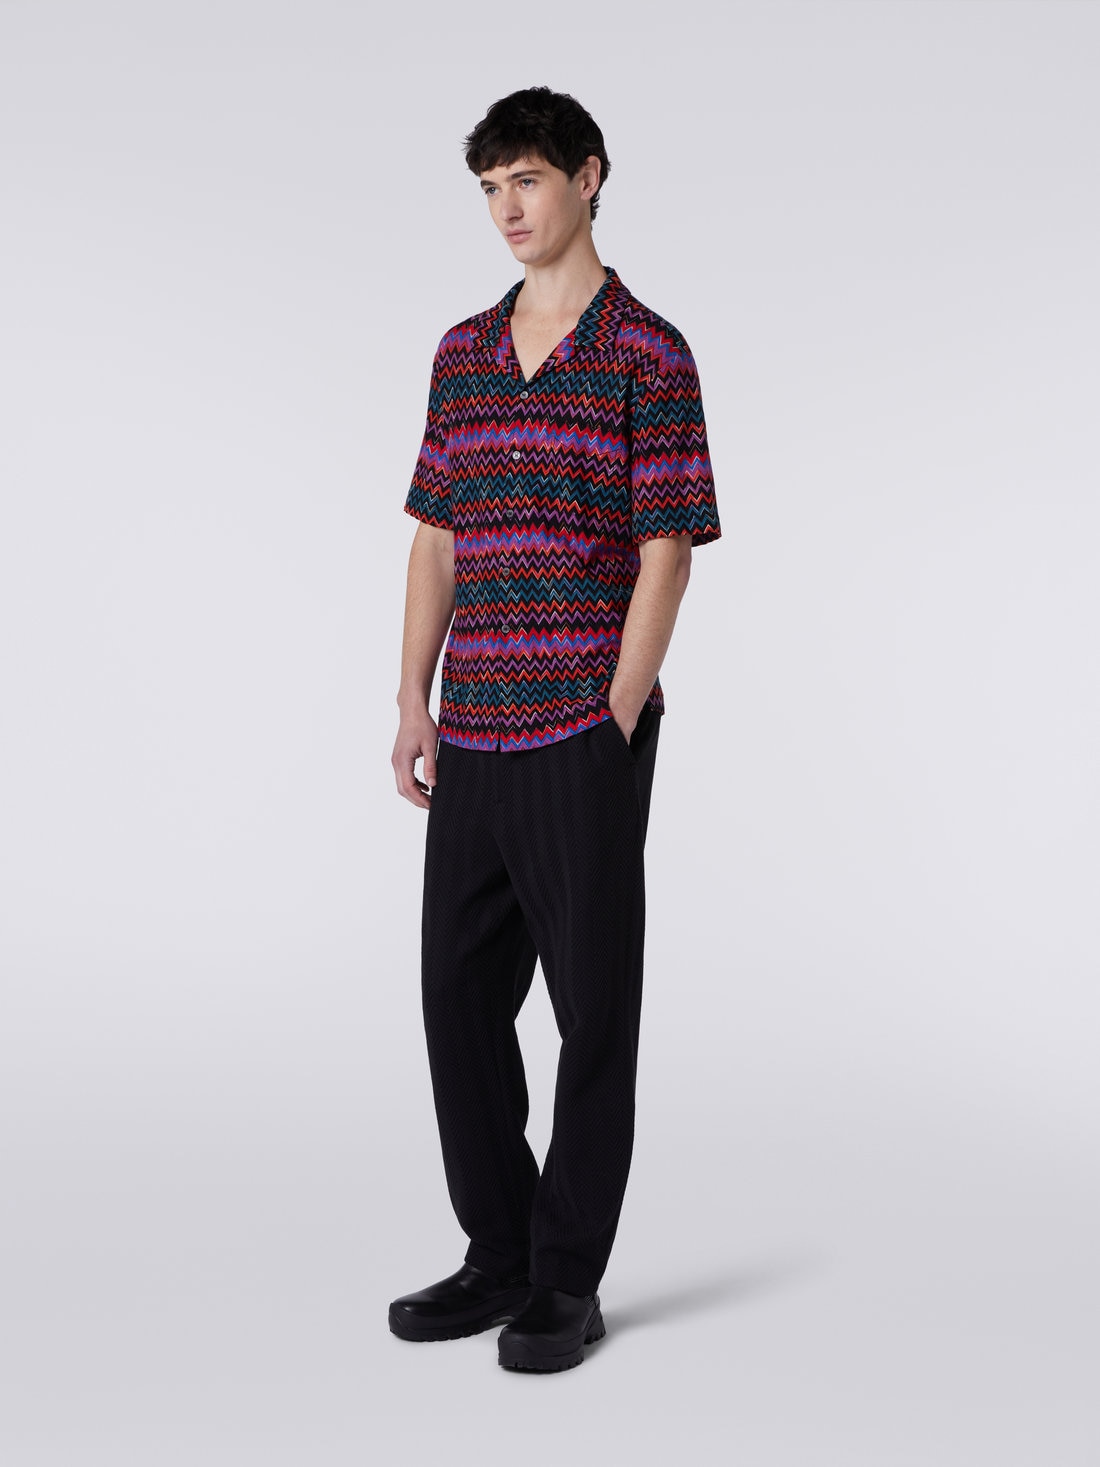 Short-sleeved bowling shirt in zigzag cotton and viscose, Black    - US23WJ08BR00OUSM8WN - 2